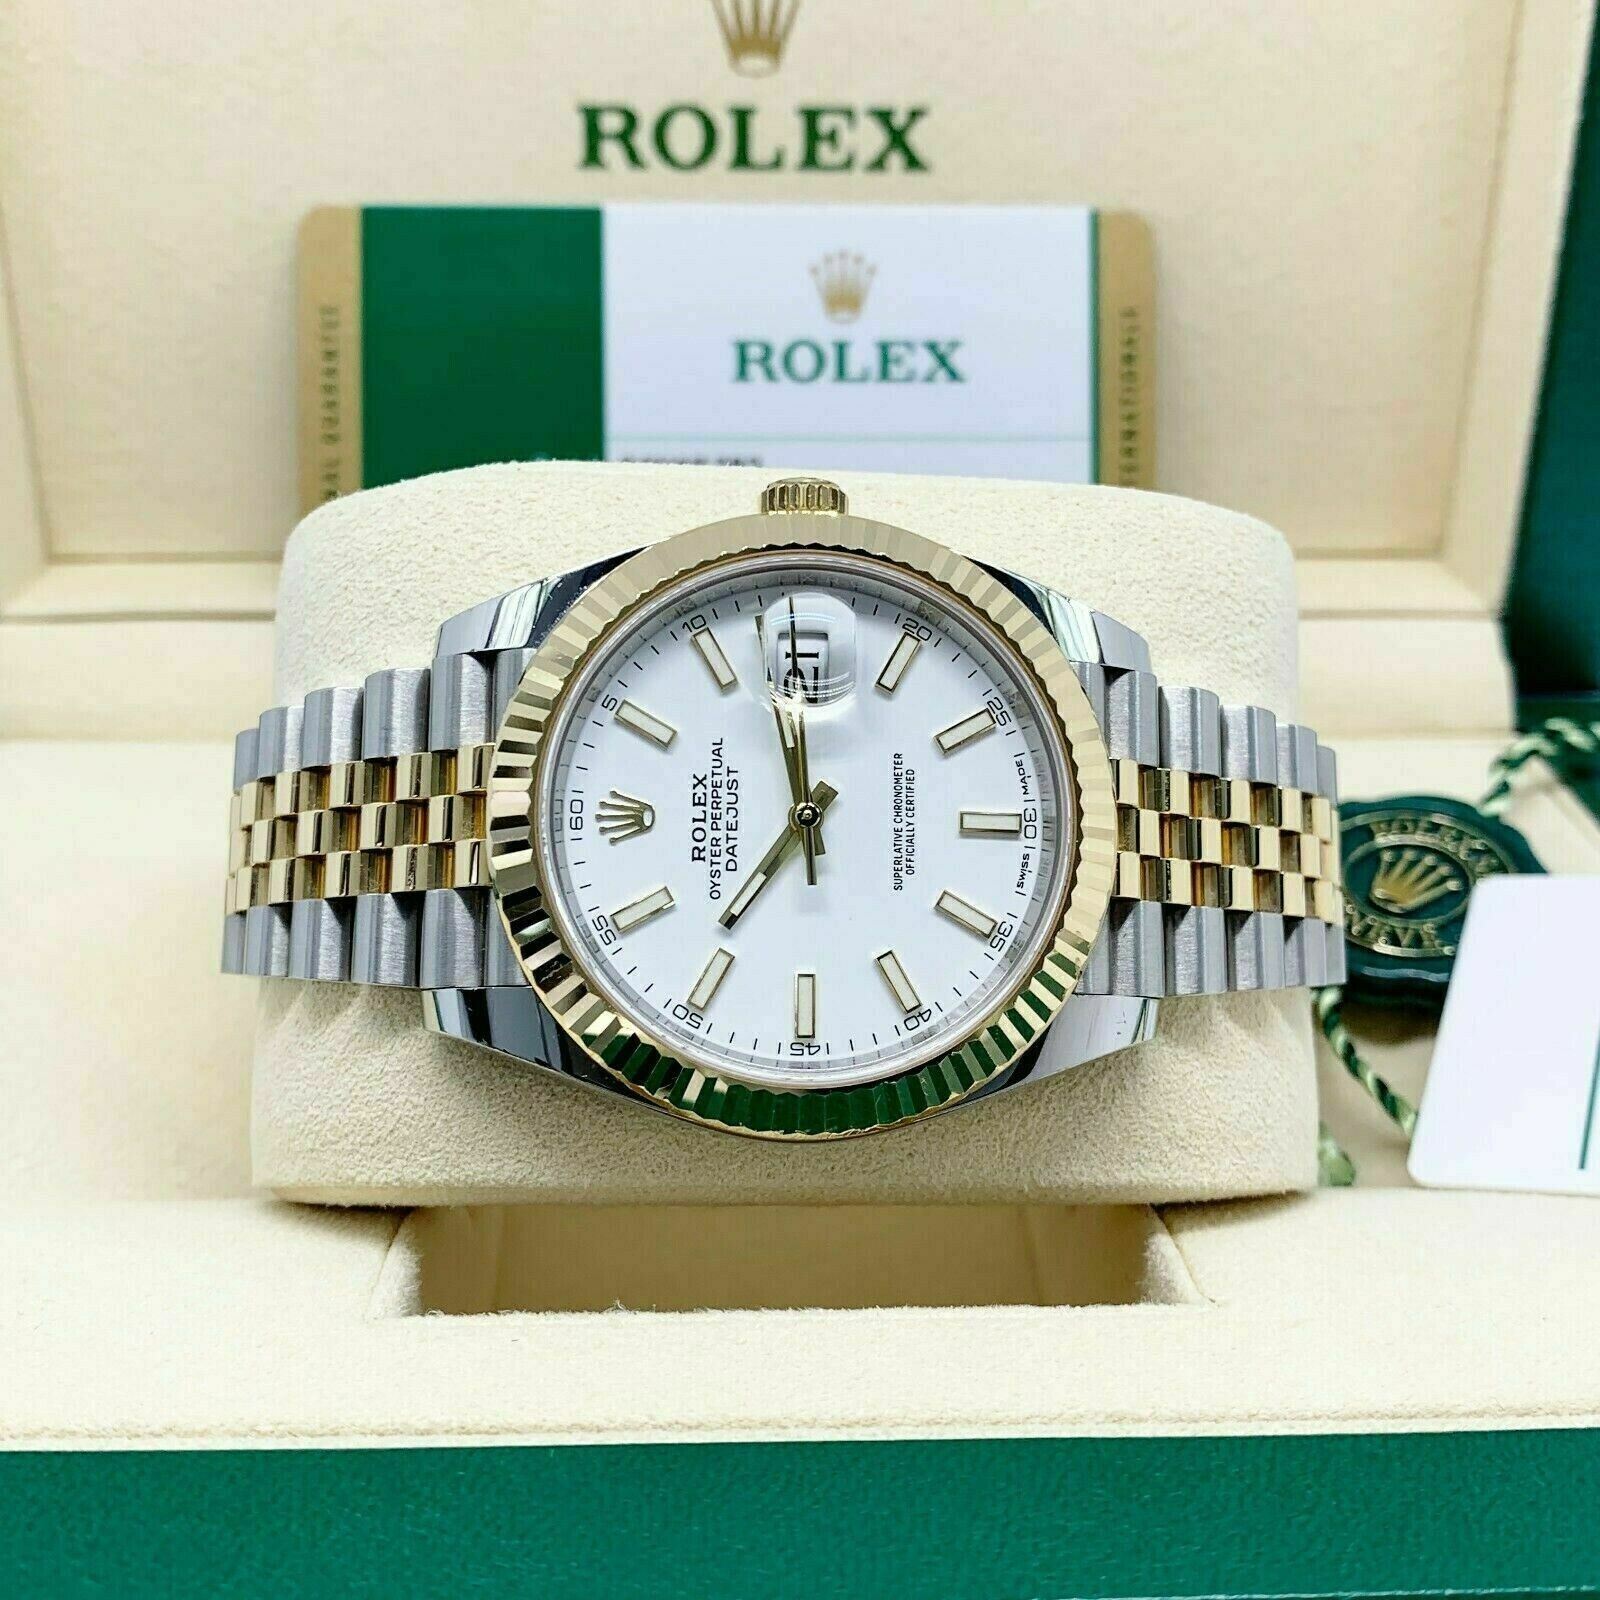 Rolex 41MM Datejust II Watch 18K Yellow Gold Stainless Steel Ref 126333 BoxCard